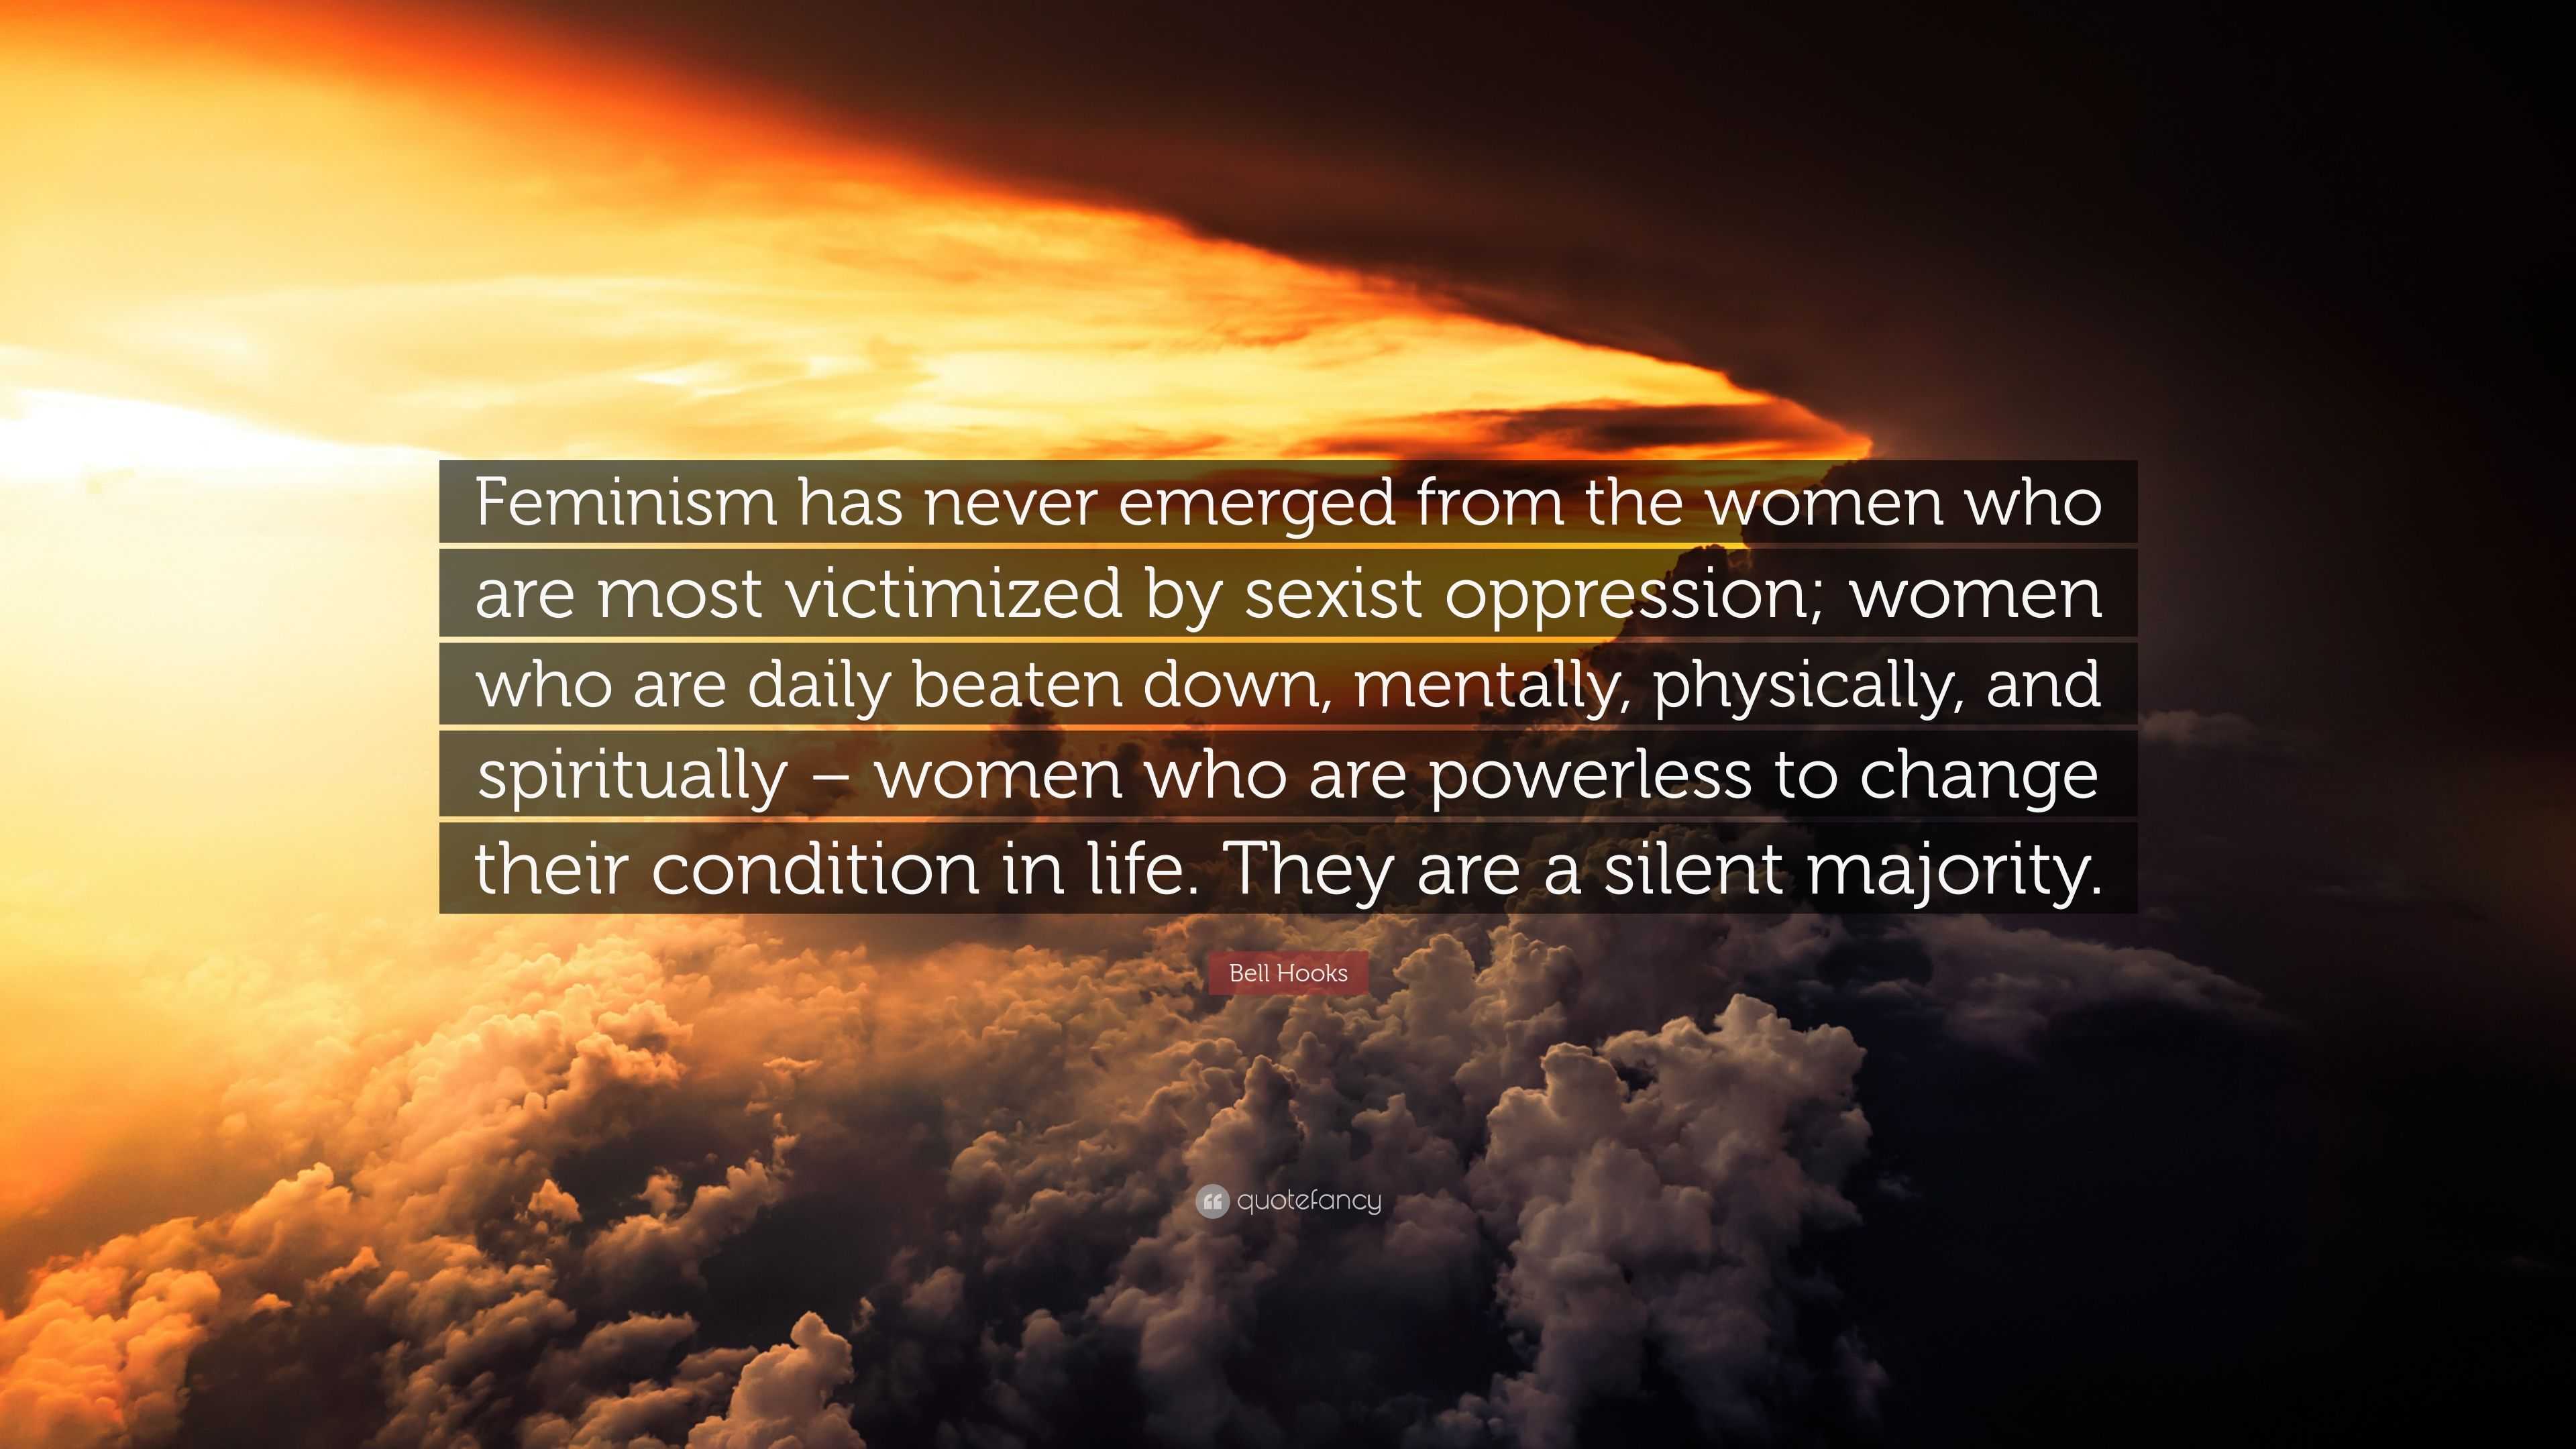 Bell Hooks Quote: “Feminism has never emerged from the women who are ...